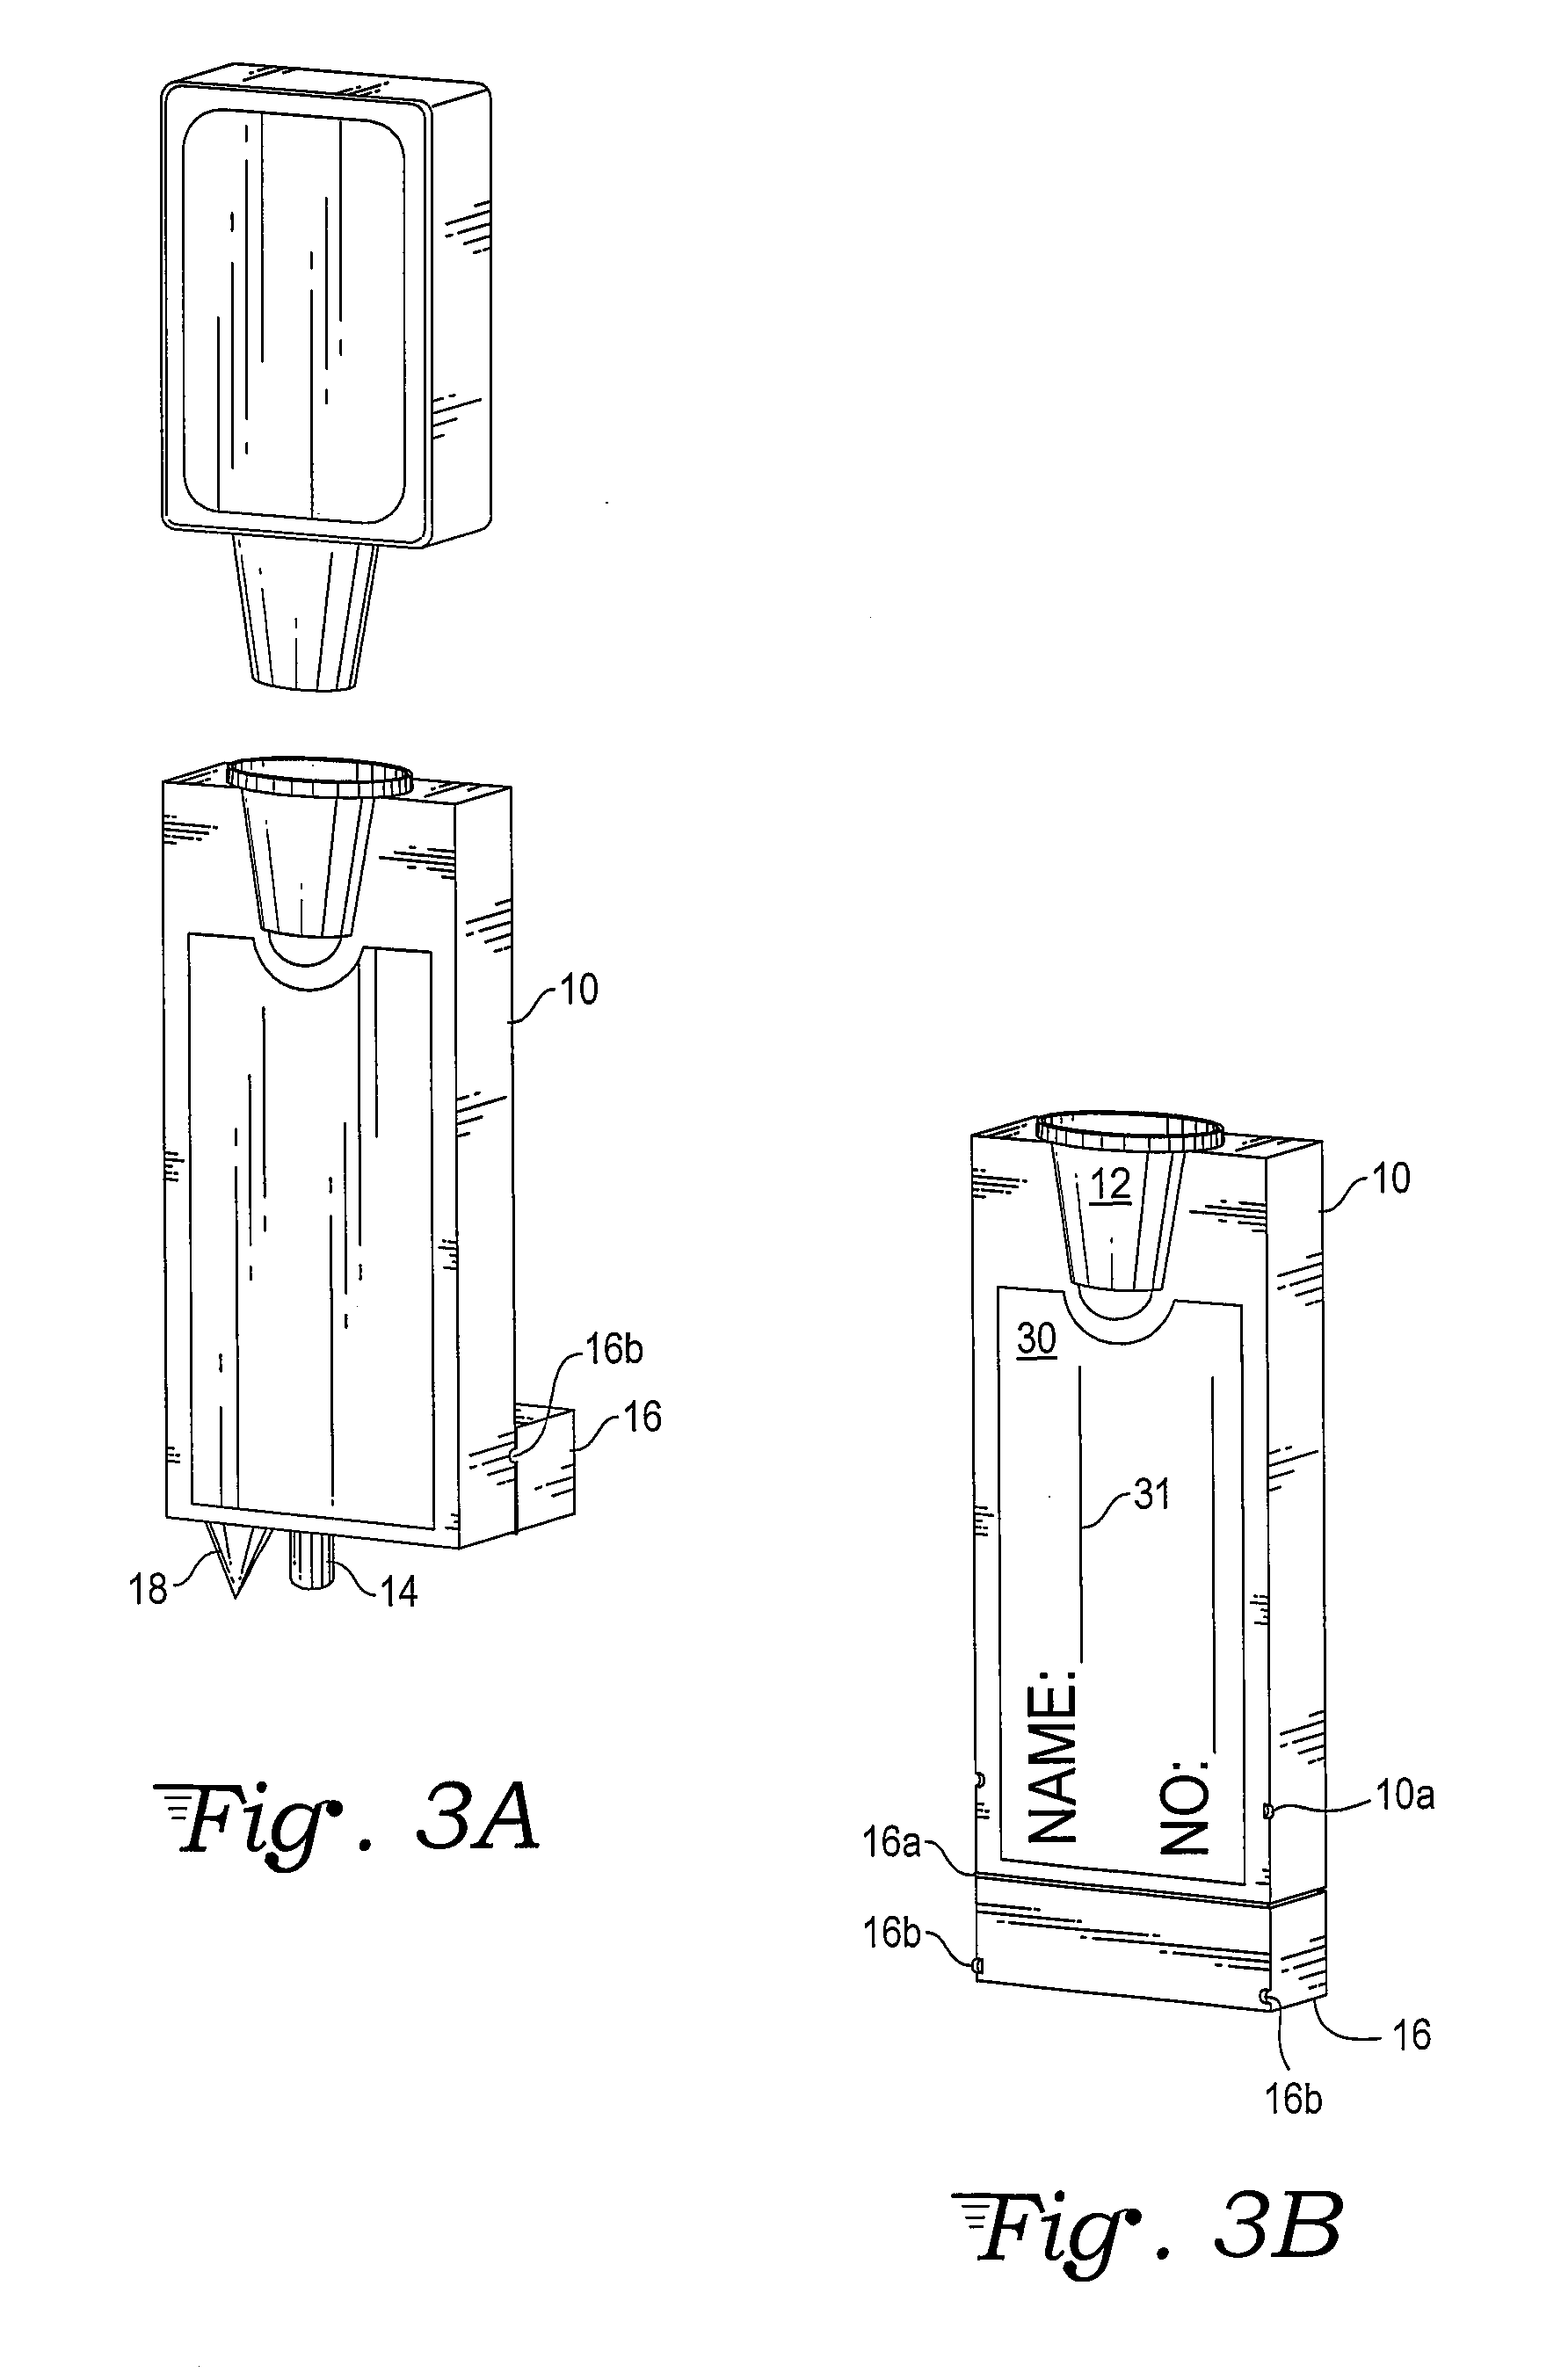 Apparatus and method for preparation of small volume of samples